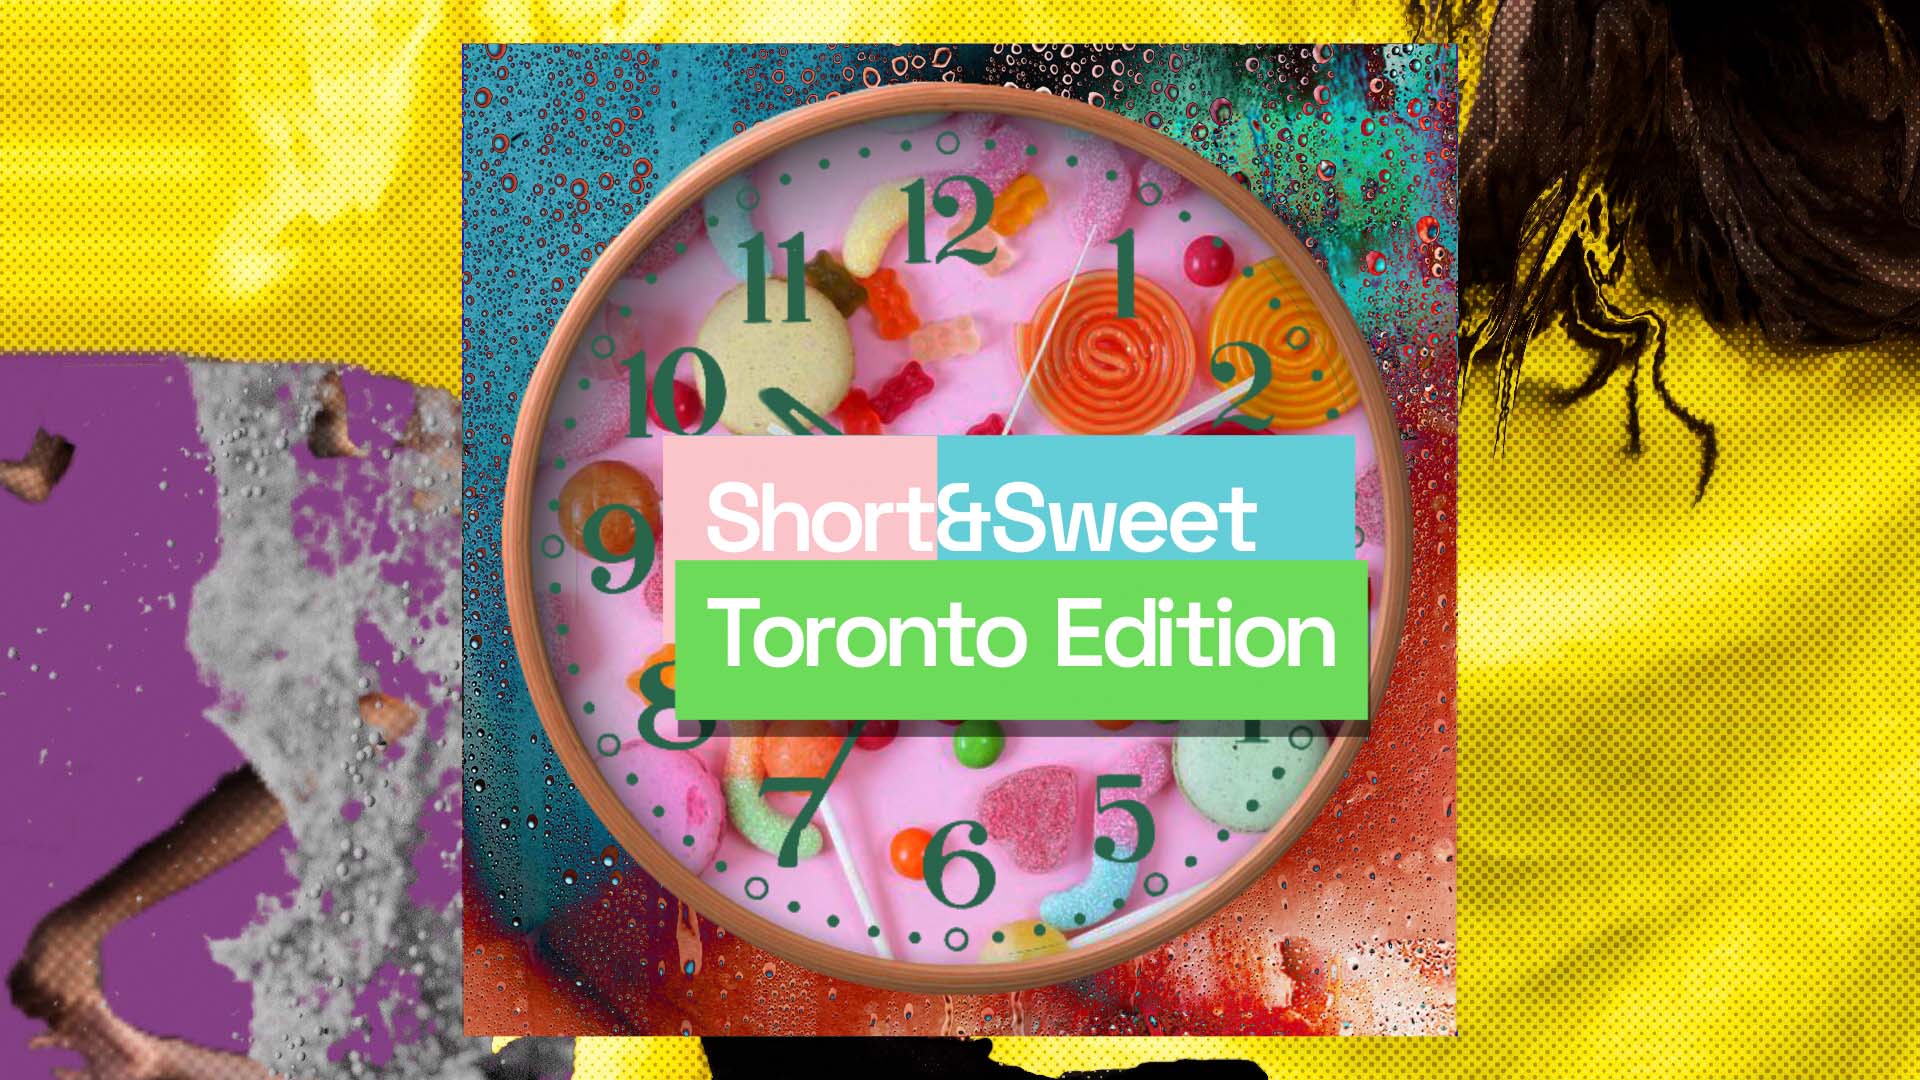 Digital image of an analog clock with various candies as a background.